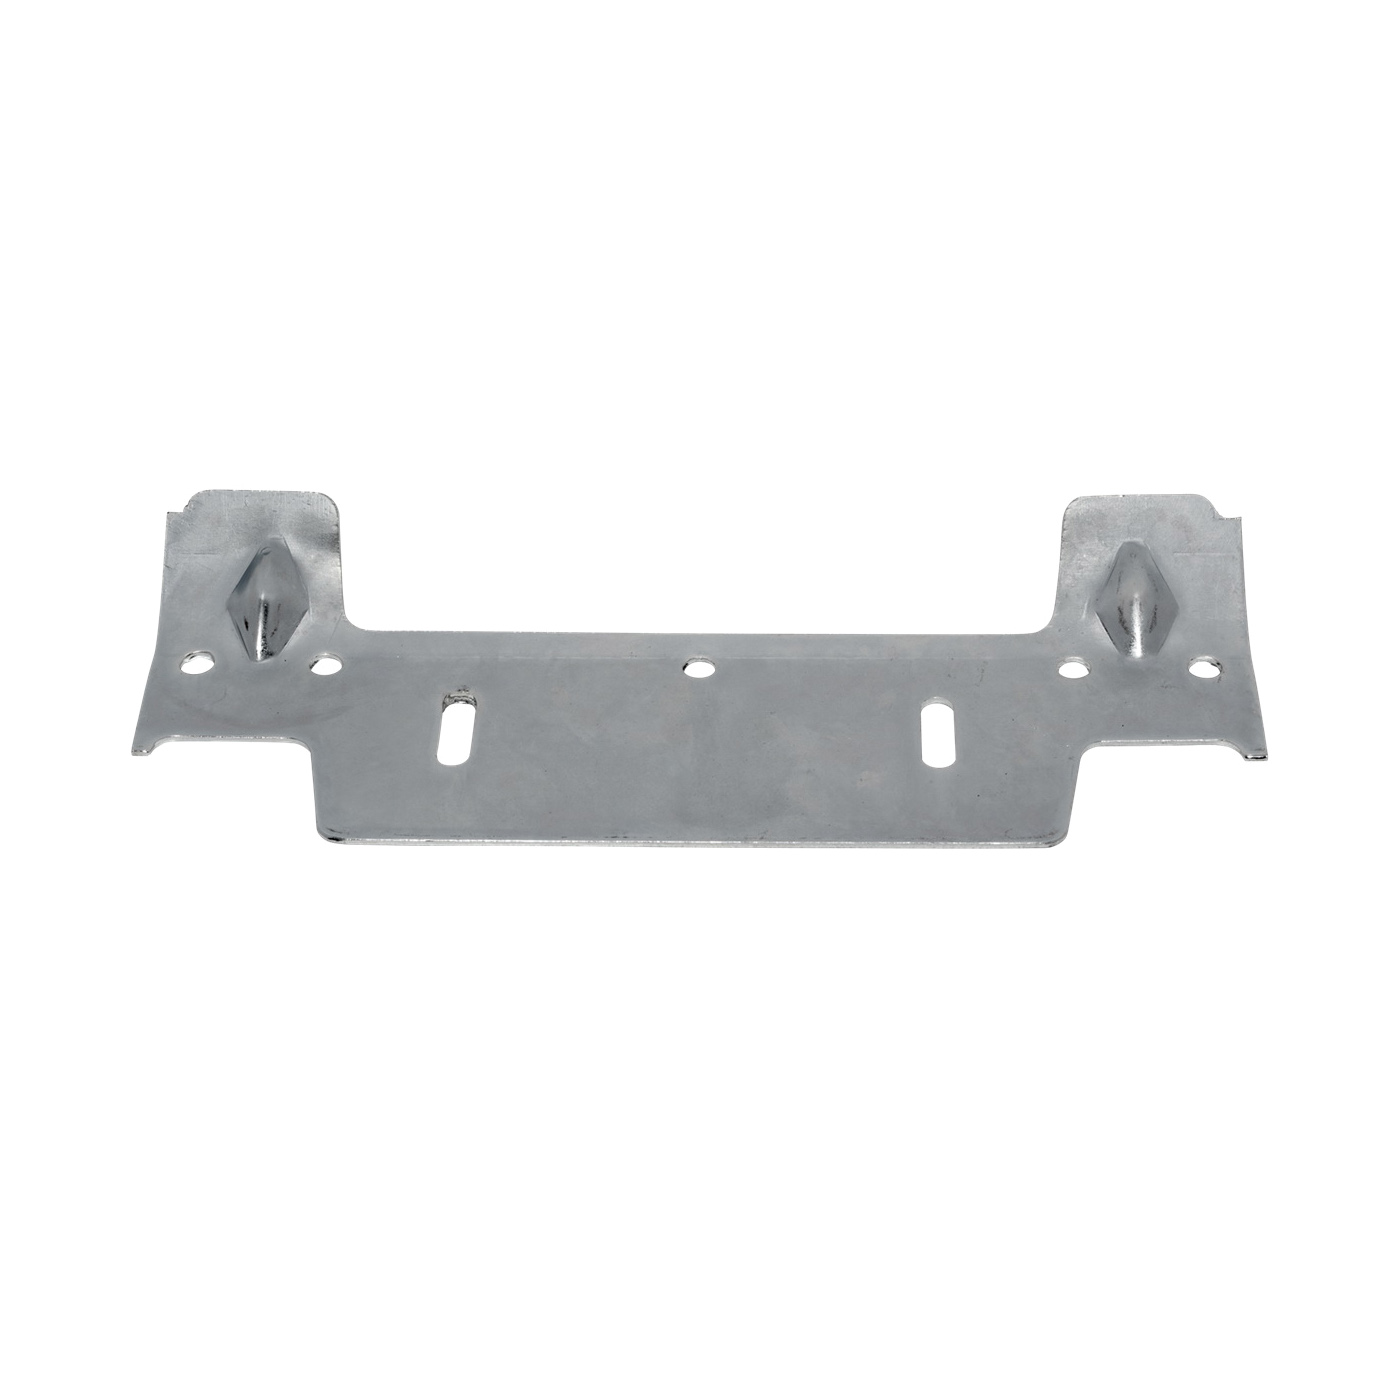 American Standard 382430-1120A Replacement Hanger Bracket, For Use With Vitreous China Lavatory, Steel, Import